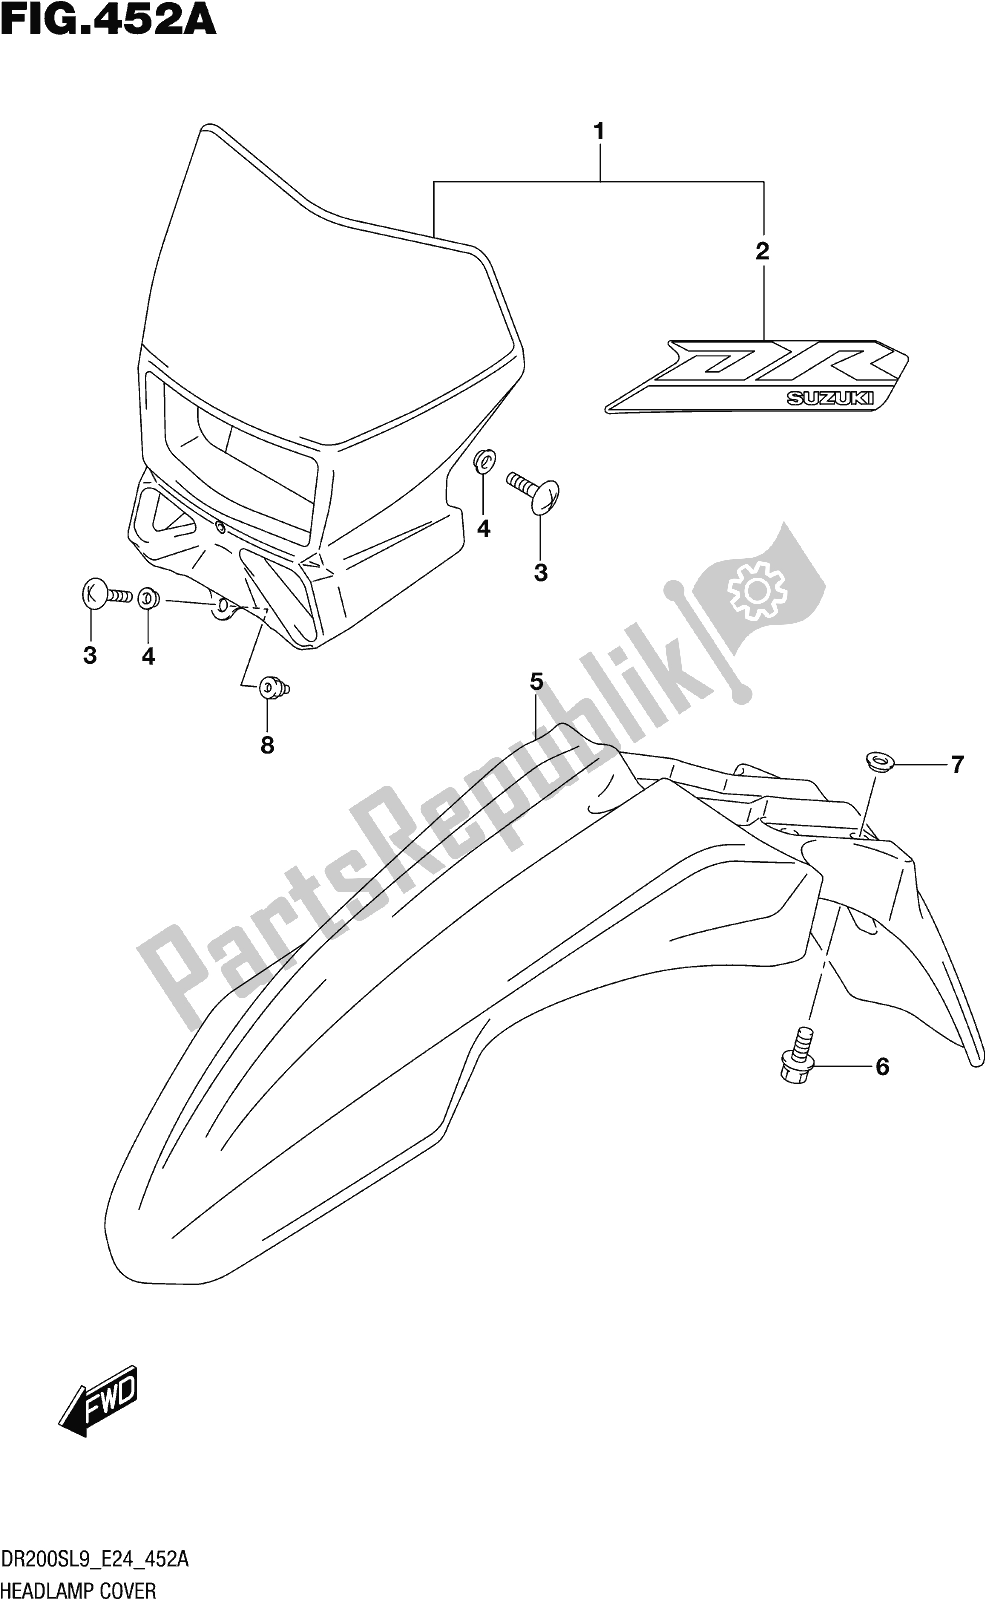 All parts for the Fig. 452a Headlamp Cover of the Suzuki DR 200S 2019